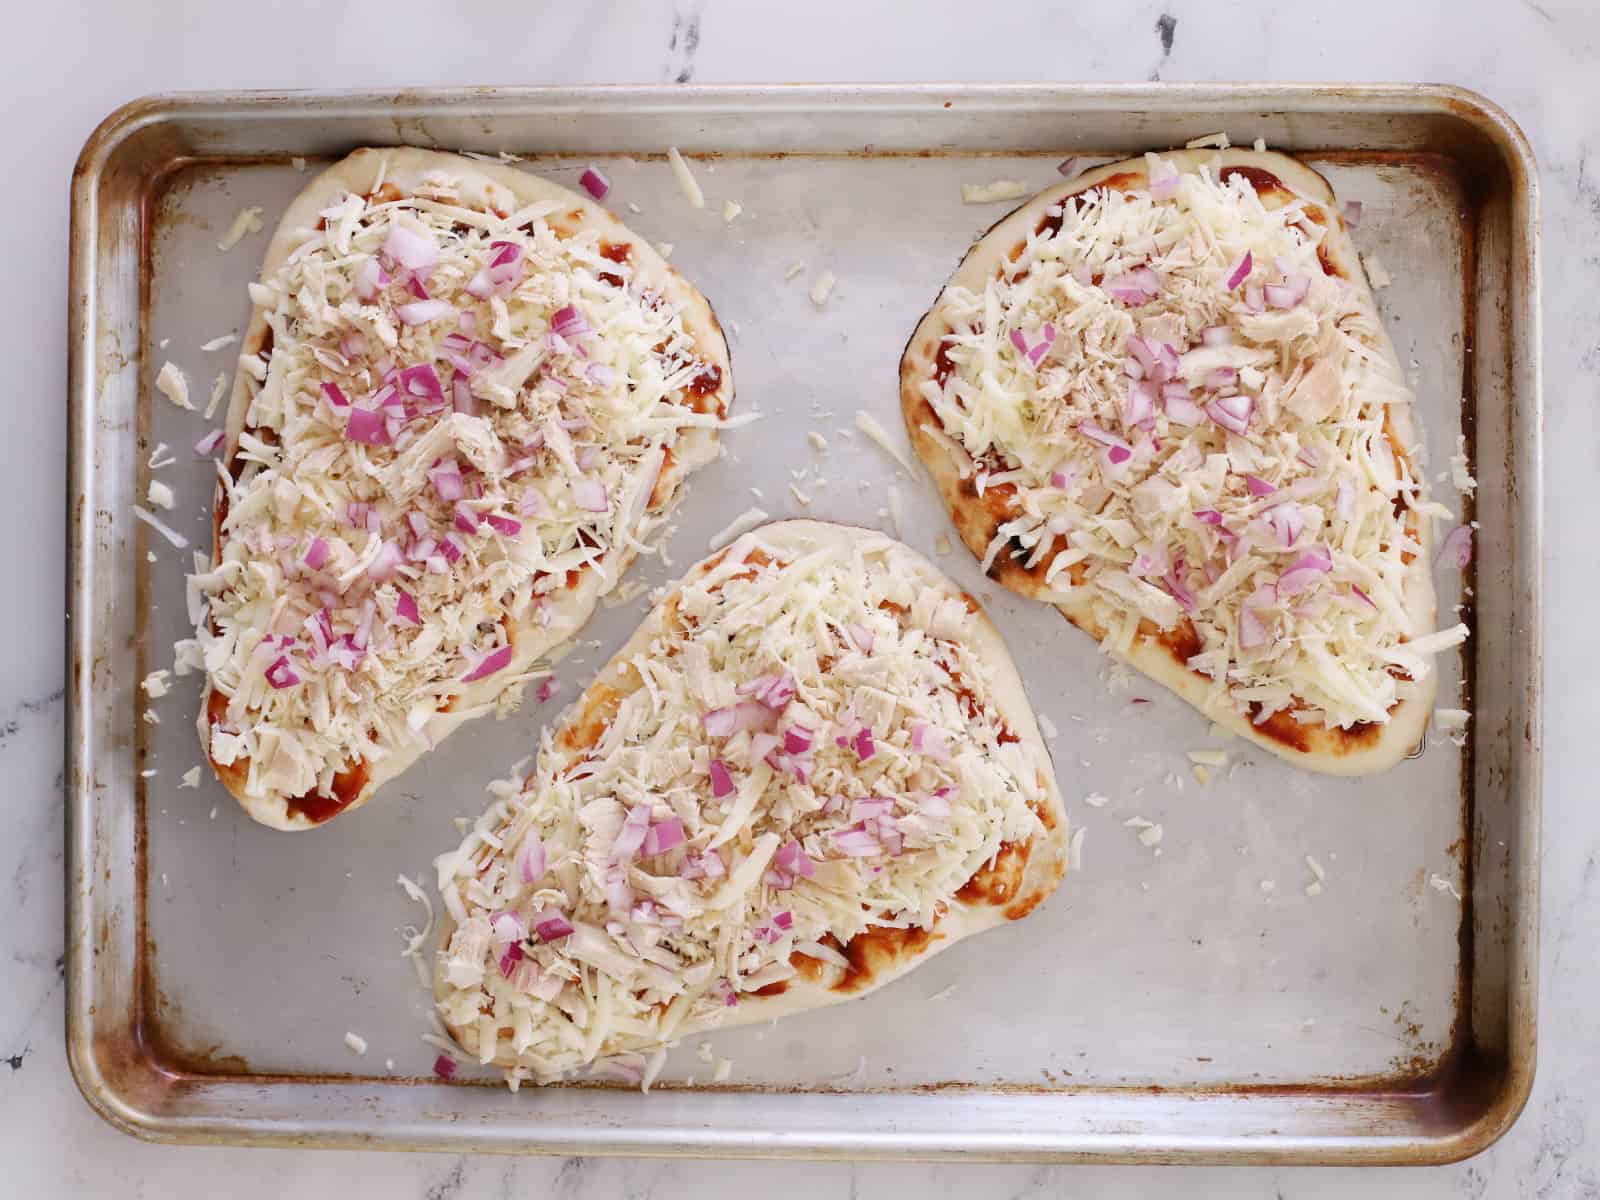 Flatbread topped with bbq sauce, cheese, chicken, and red onions.